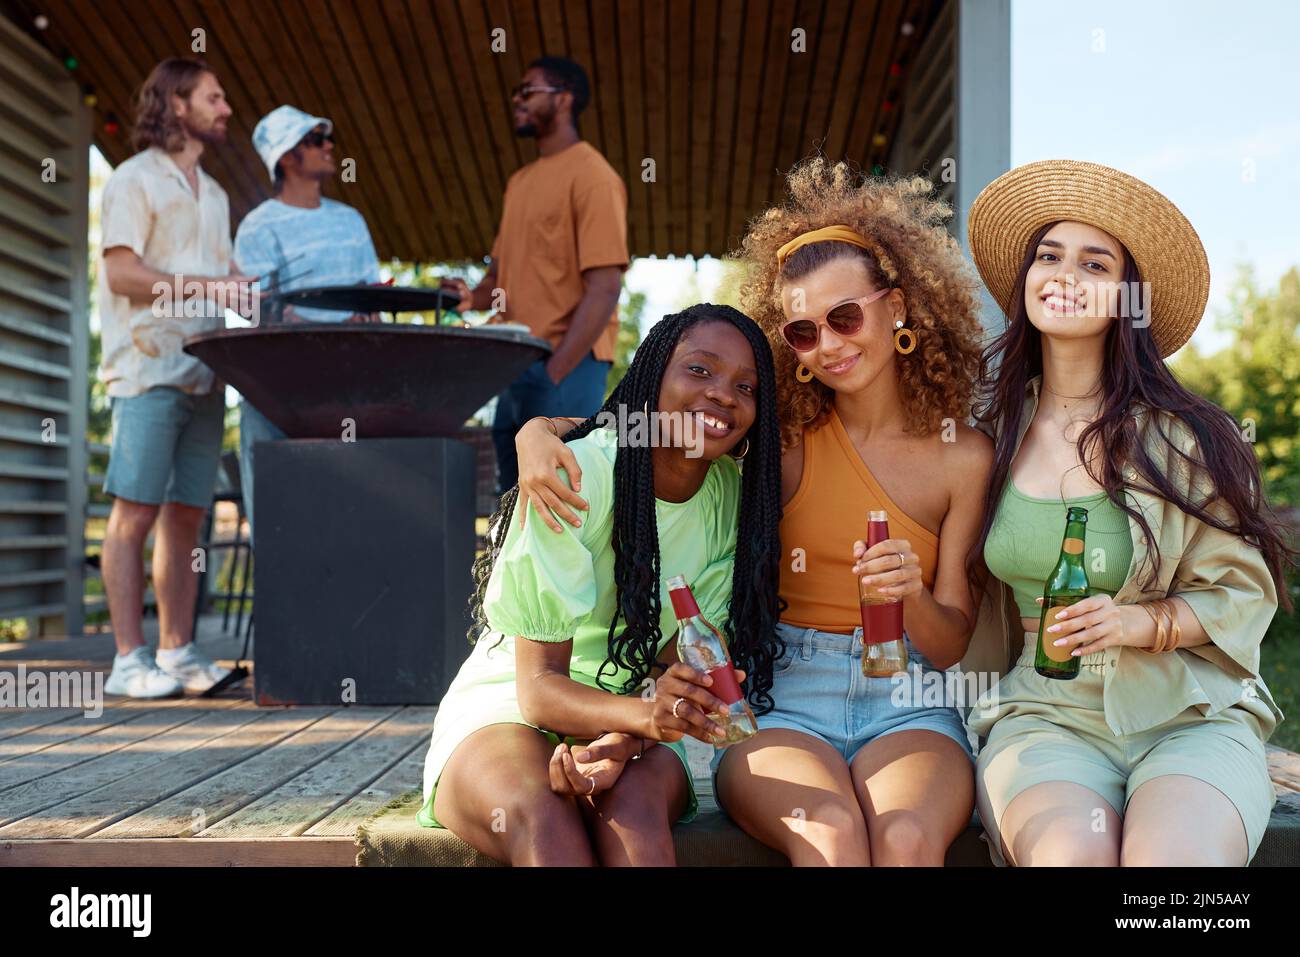 Diverse group of girls looking at camera while enjoying party outdoors with friends in Summer cabin, copy space Stock Photo